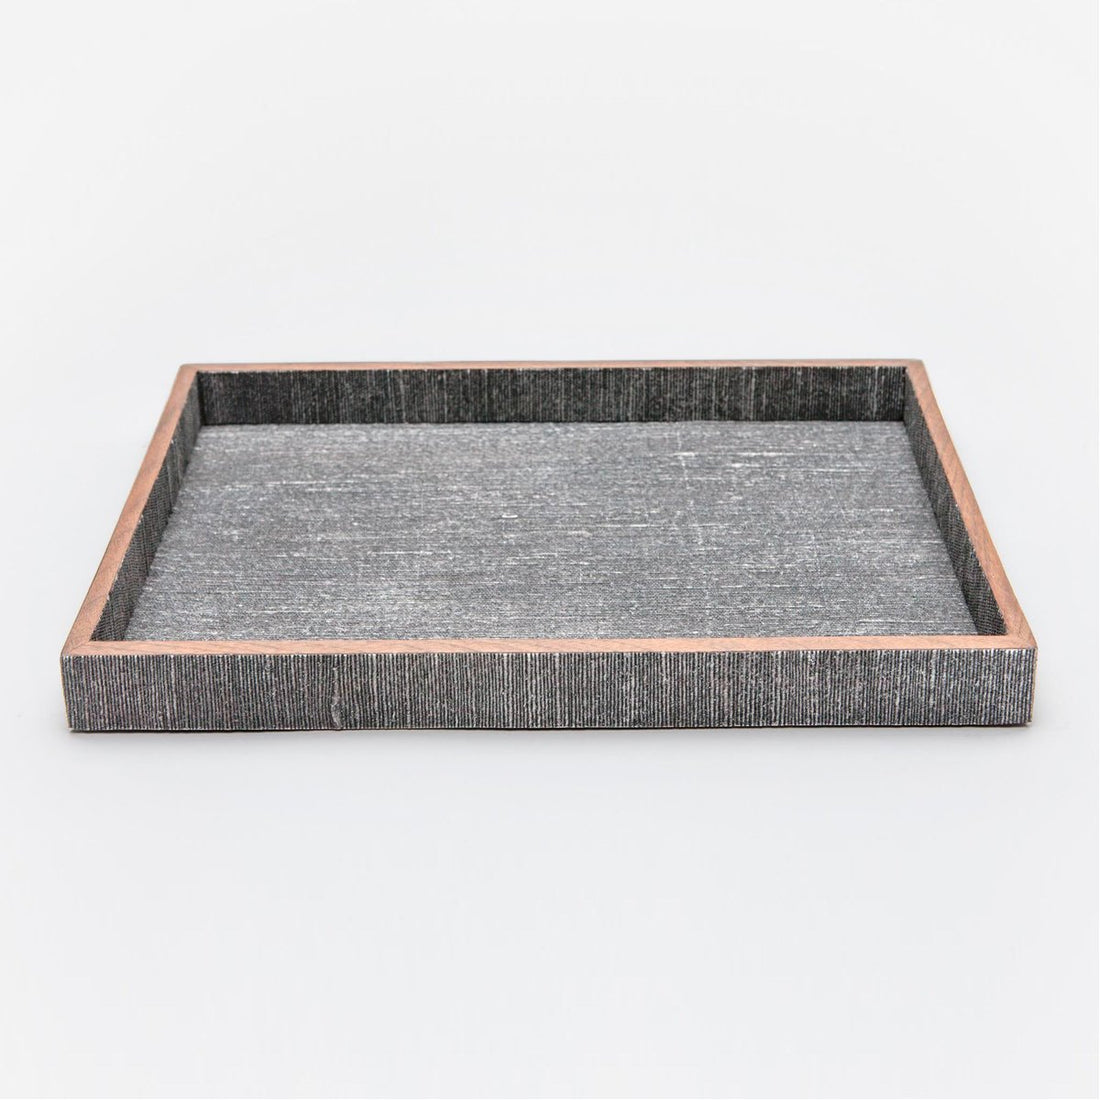 Pigeon and Poodle Bruges Rectangular Tray - Straight, 2-Piece Set